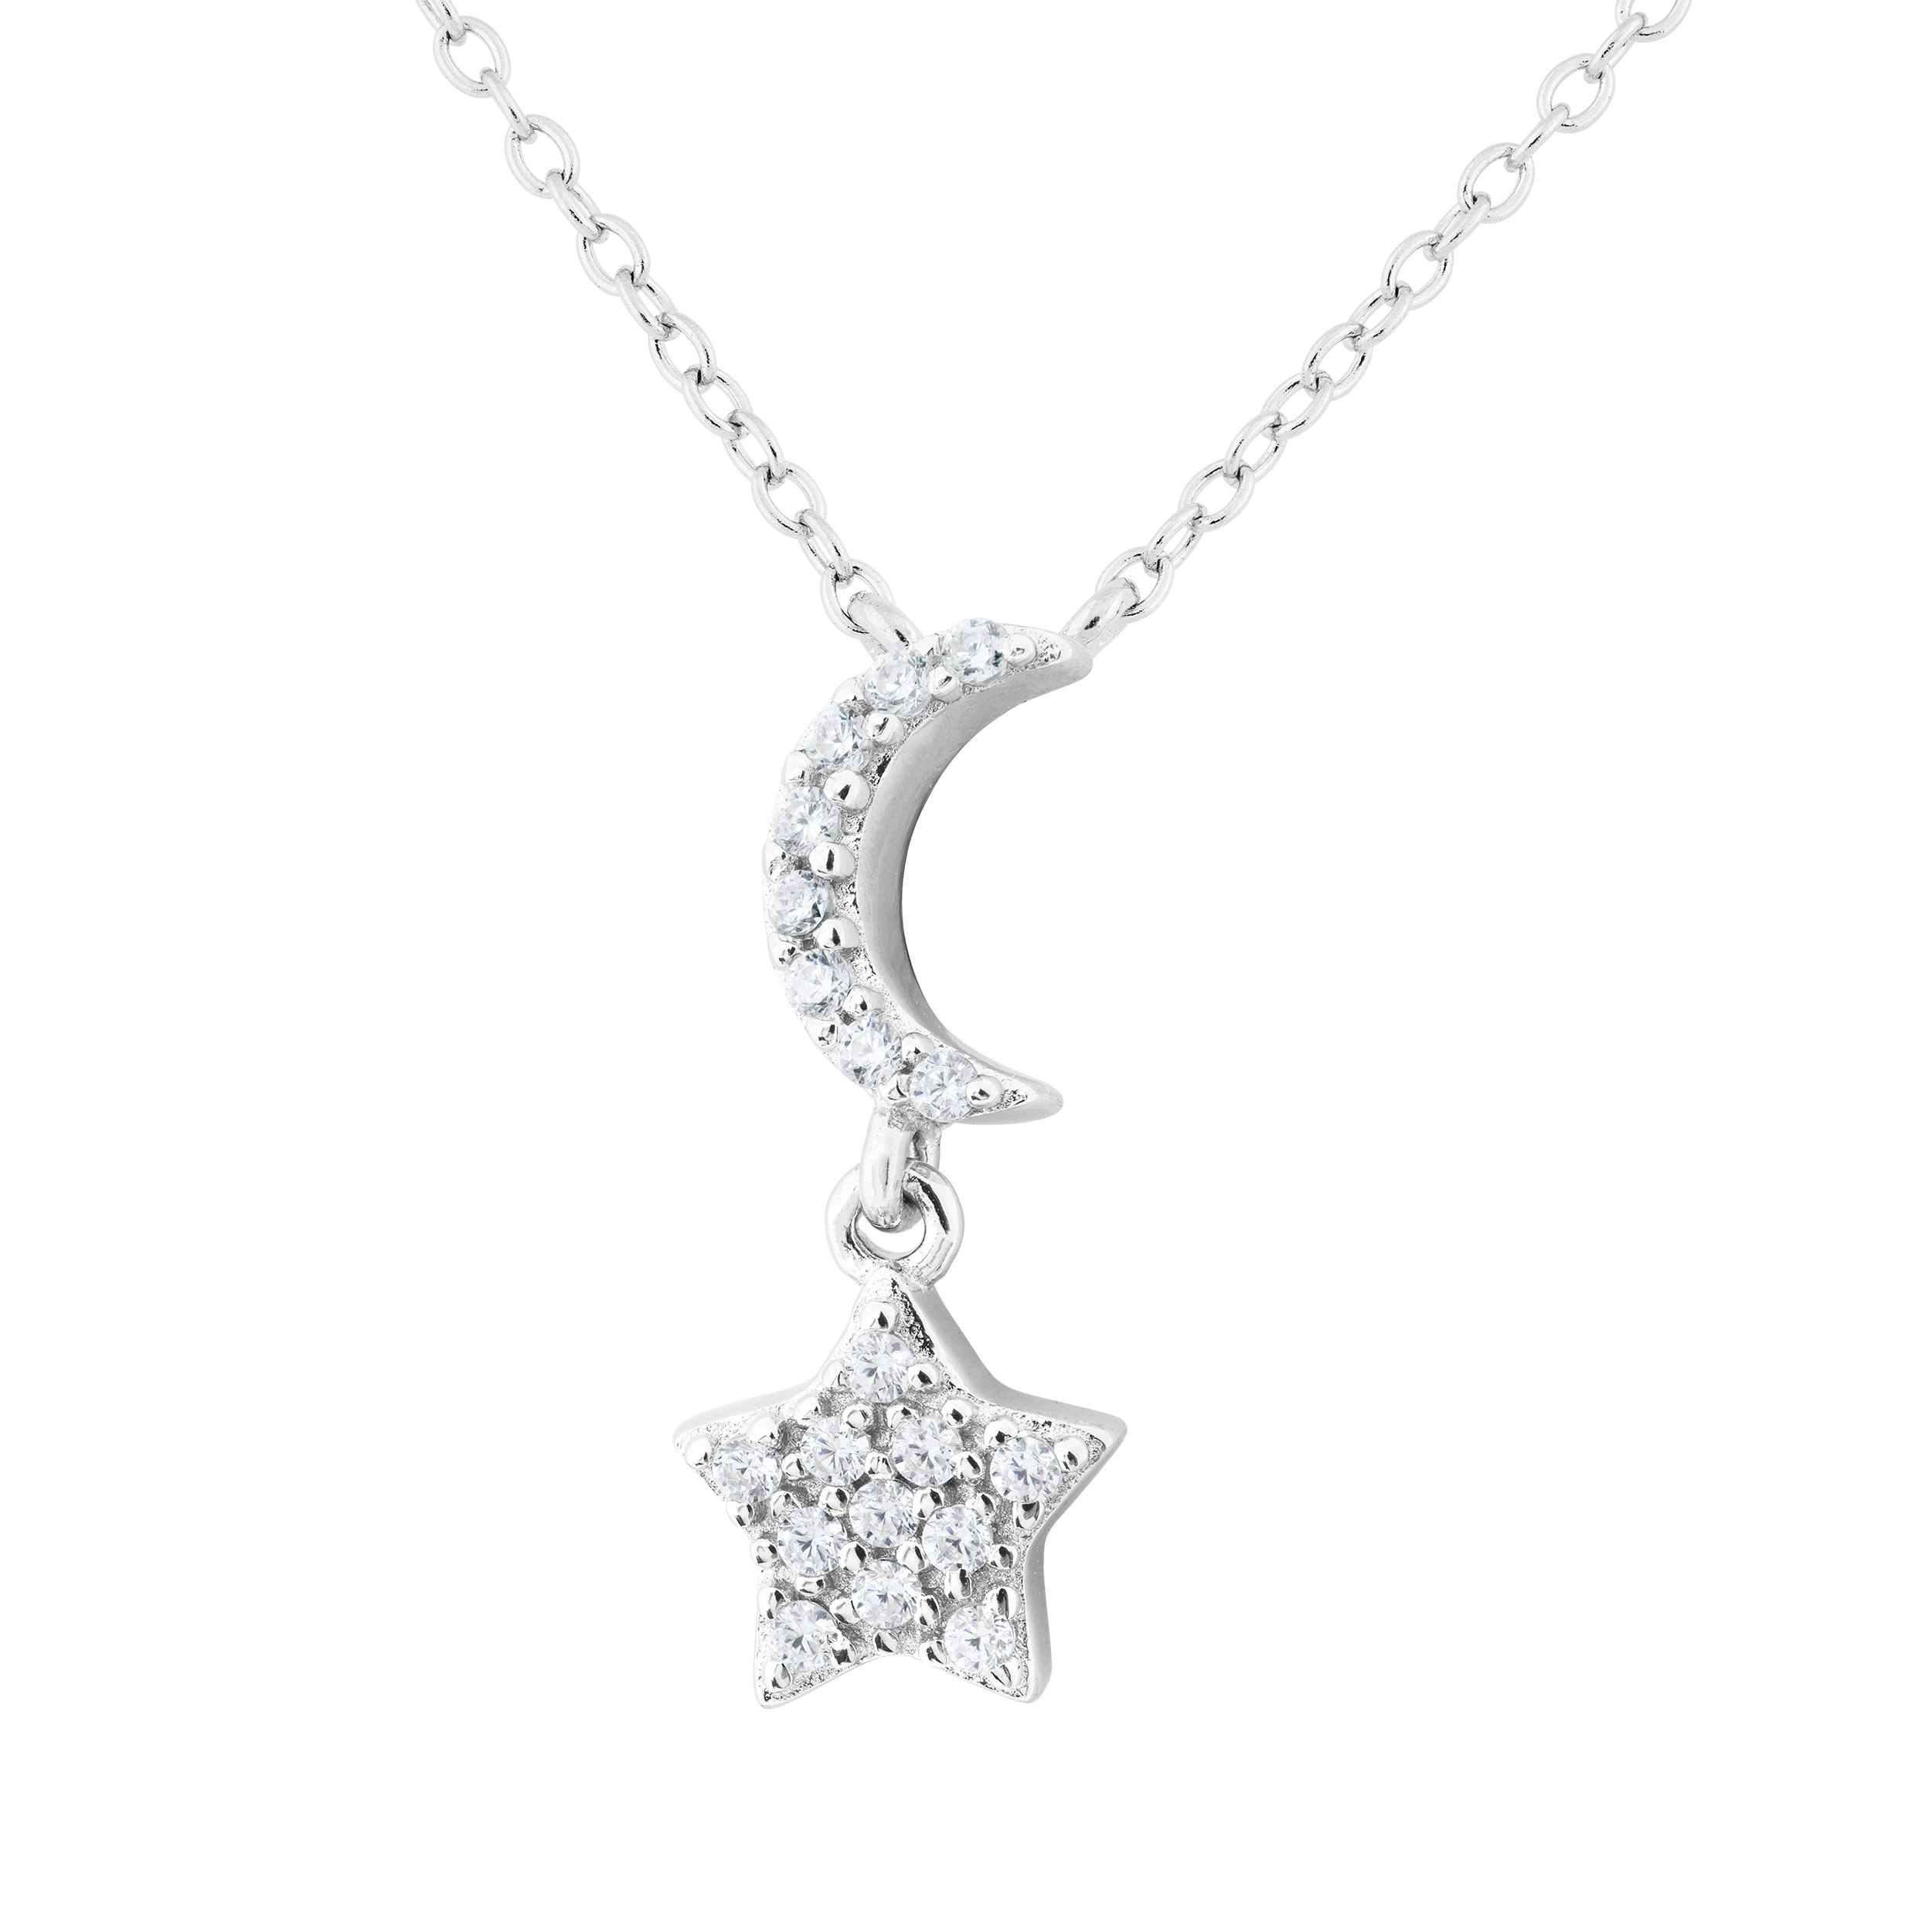 Moon and Star Pendant Necklace, Rhodium Plated Sterling Silver, 18